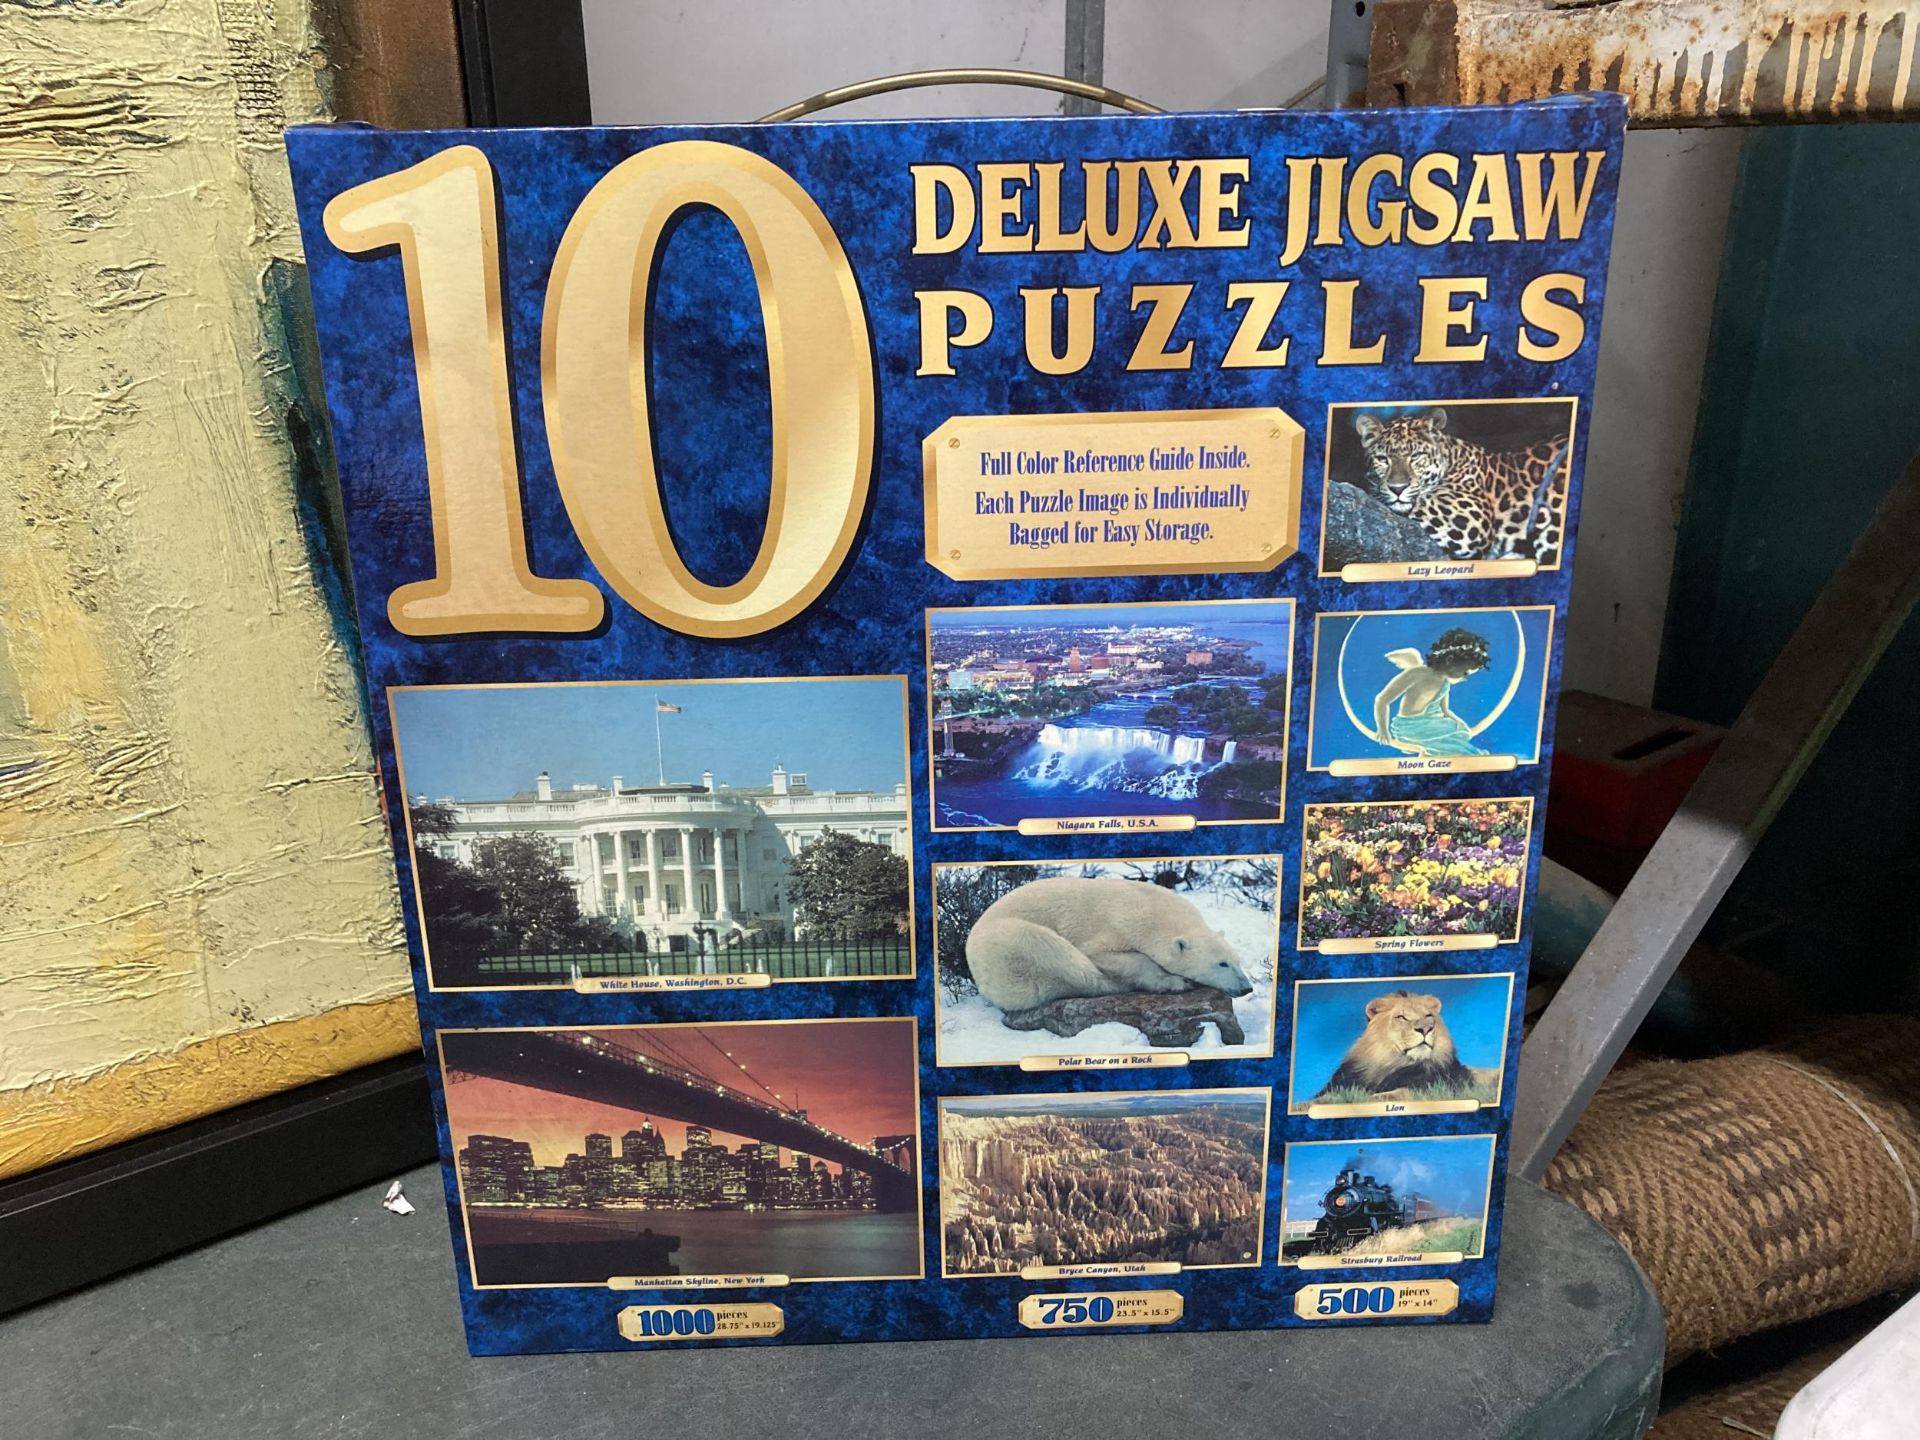 A BOXED 10 DELUXE JIGSAW PUZZLES - AS NEW